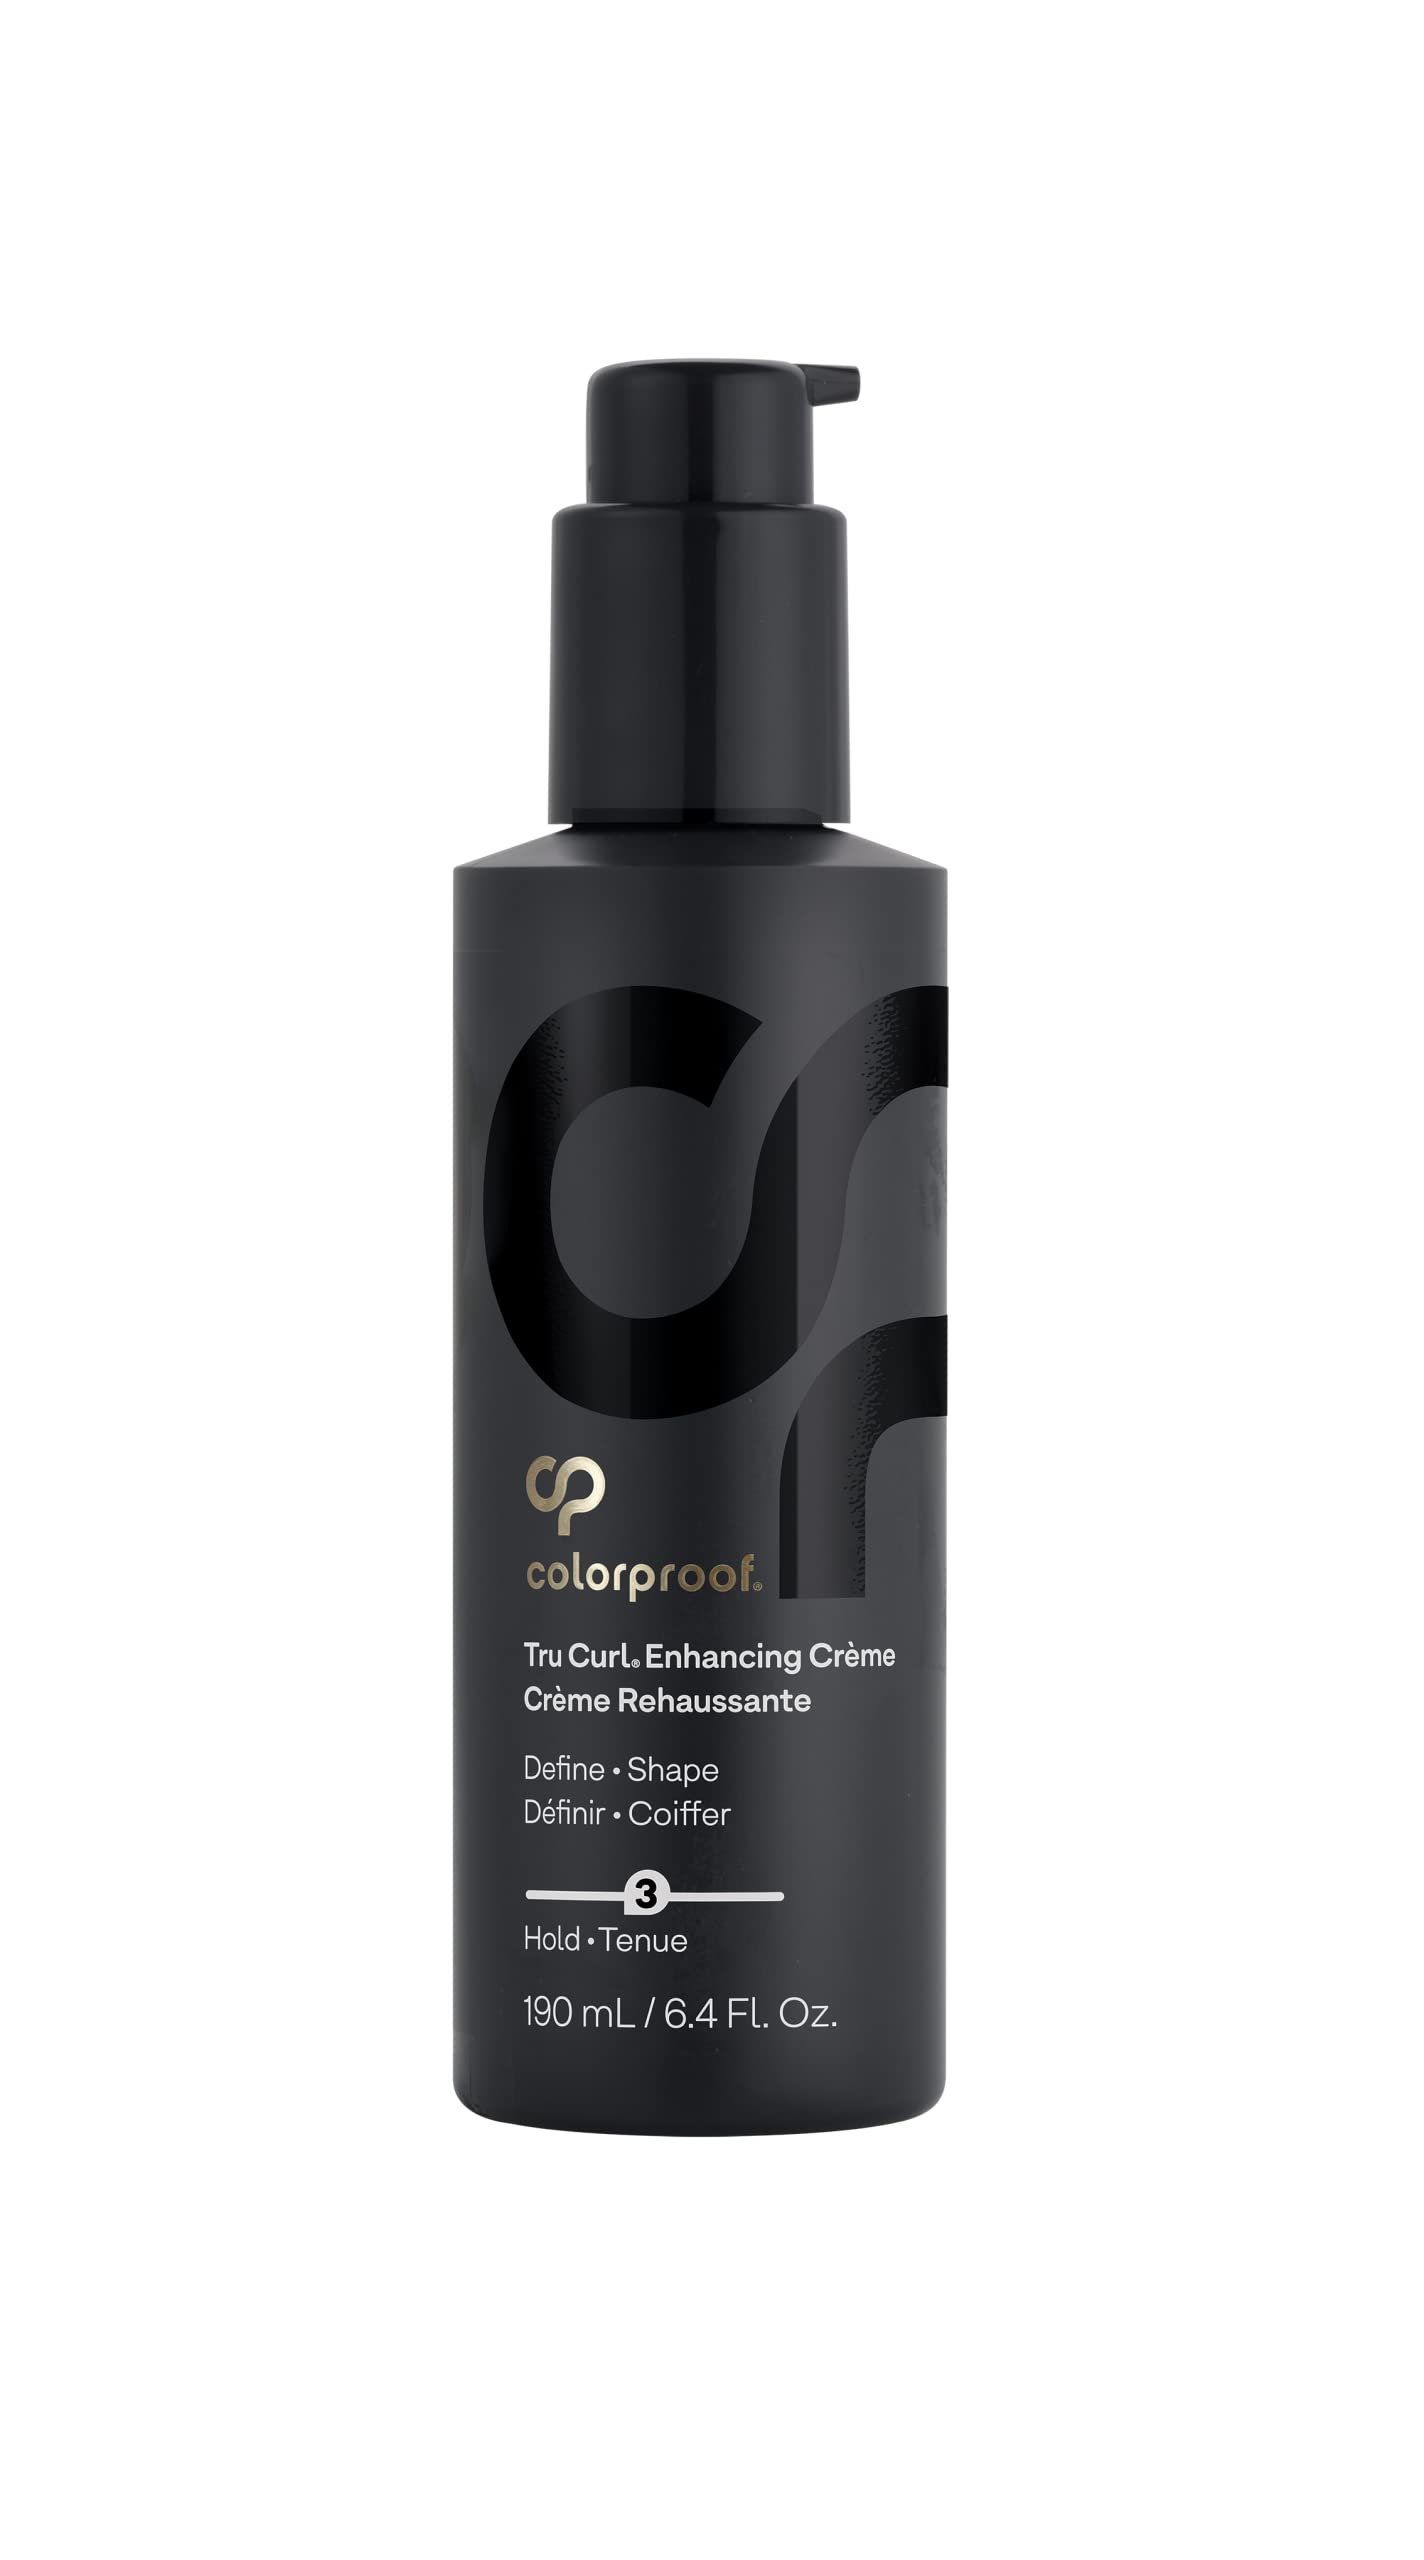 Colorproof Tru Curl Enhancing Crème, 6oz - For Curly & Wavy Color-Treated Hair, Enhance Curl Pattern, For Shape Separation & Frizz Control, Humidity & Heat Protection, Sulfate-Free, Vegan